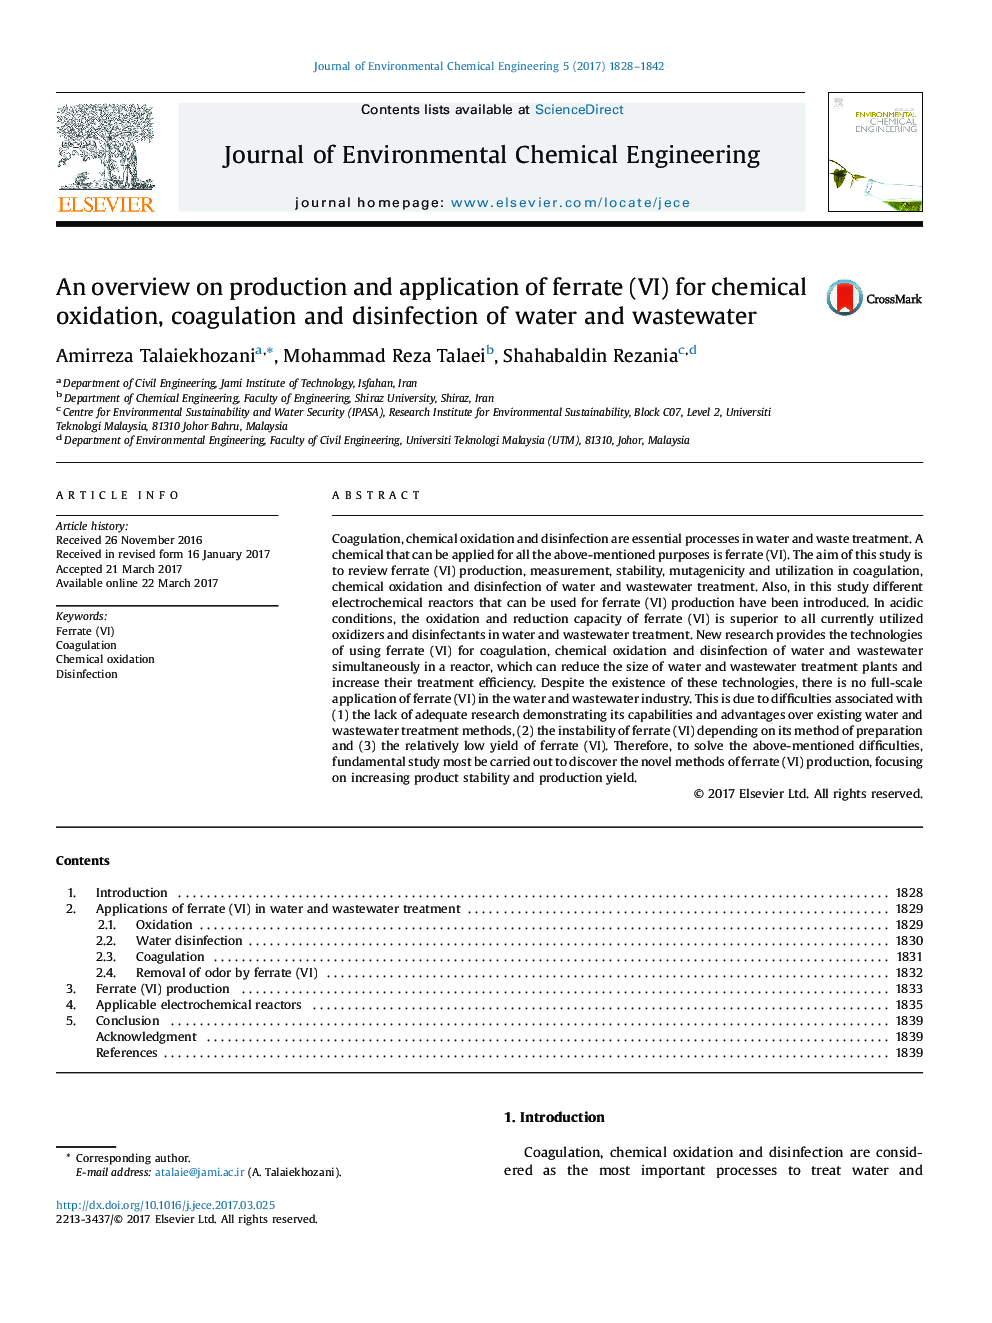 An overview on production and application of ferrate (VI) for chemical oxidation, coagulation and disinfection of water and wastewater